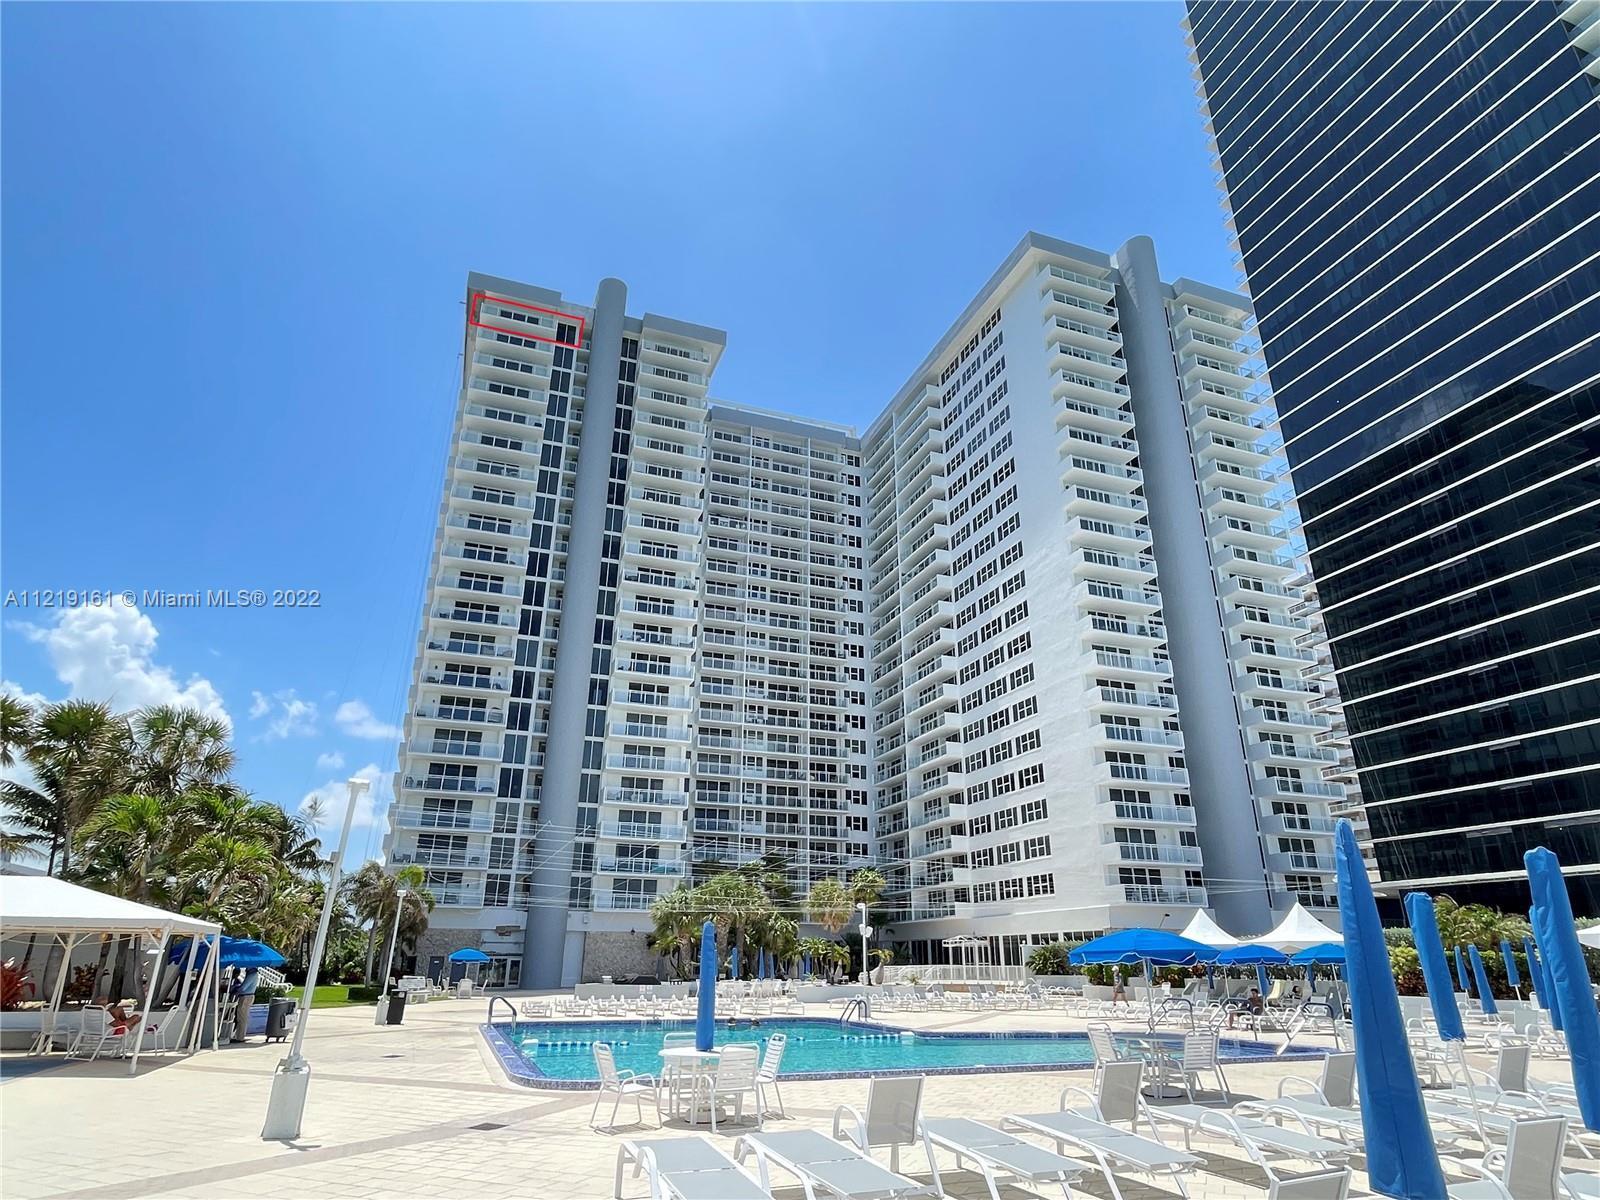 Breathtaking ocean and intracoastal views everywhere from this corner unit Penthouse. High ceilings 